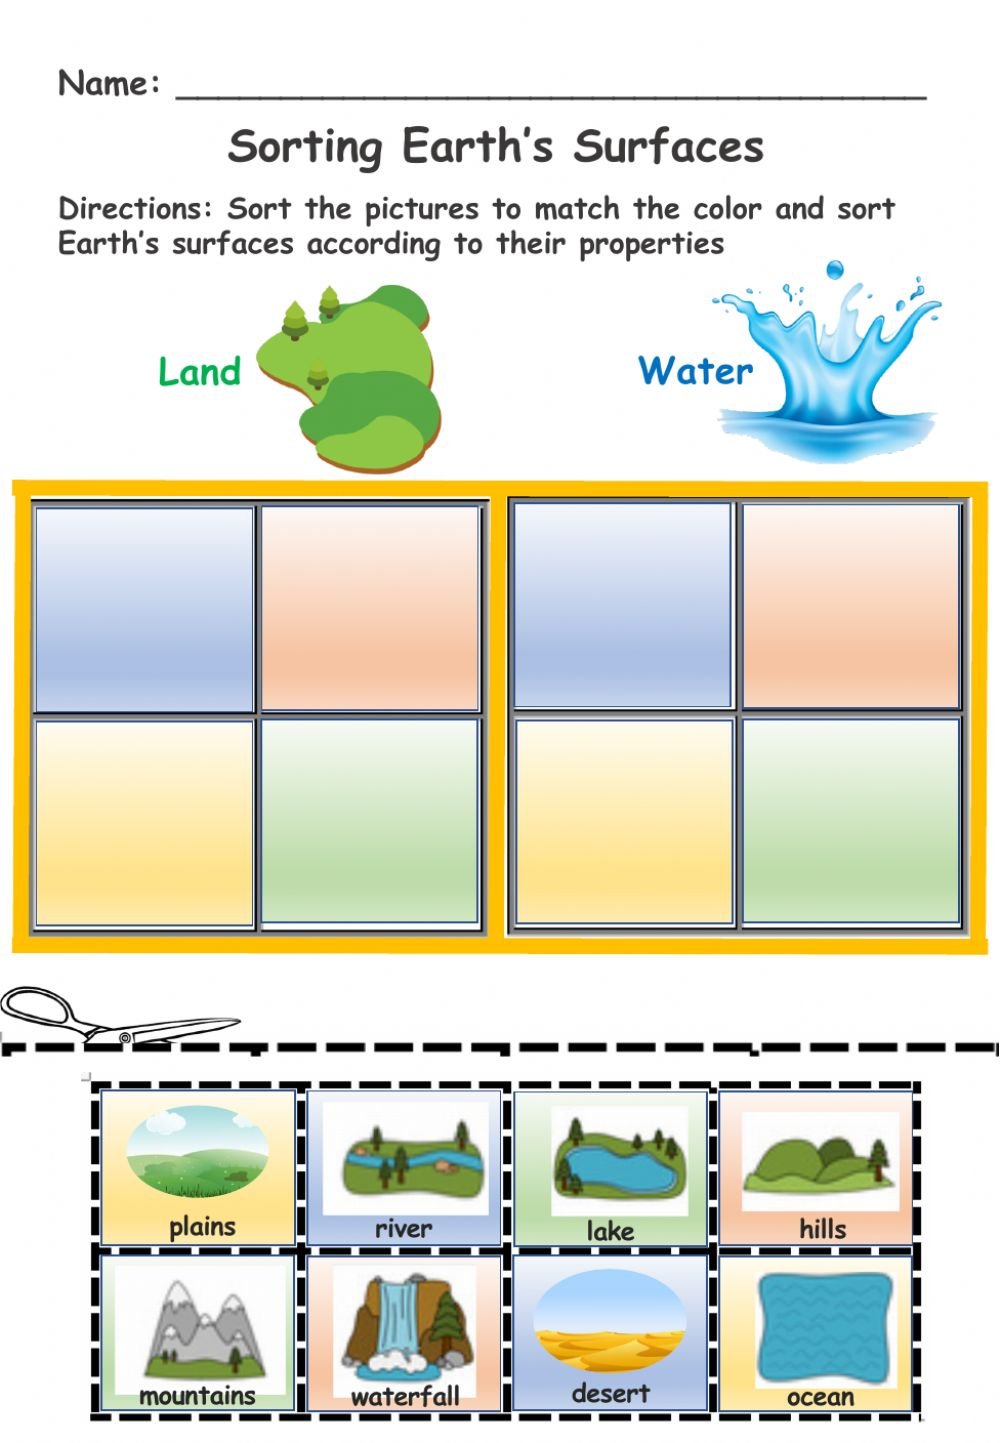 Sorting Earths Surfaces By Land And Water Worksheet